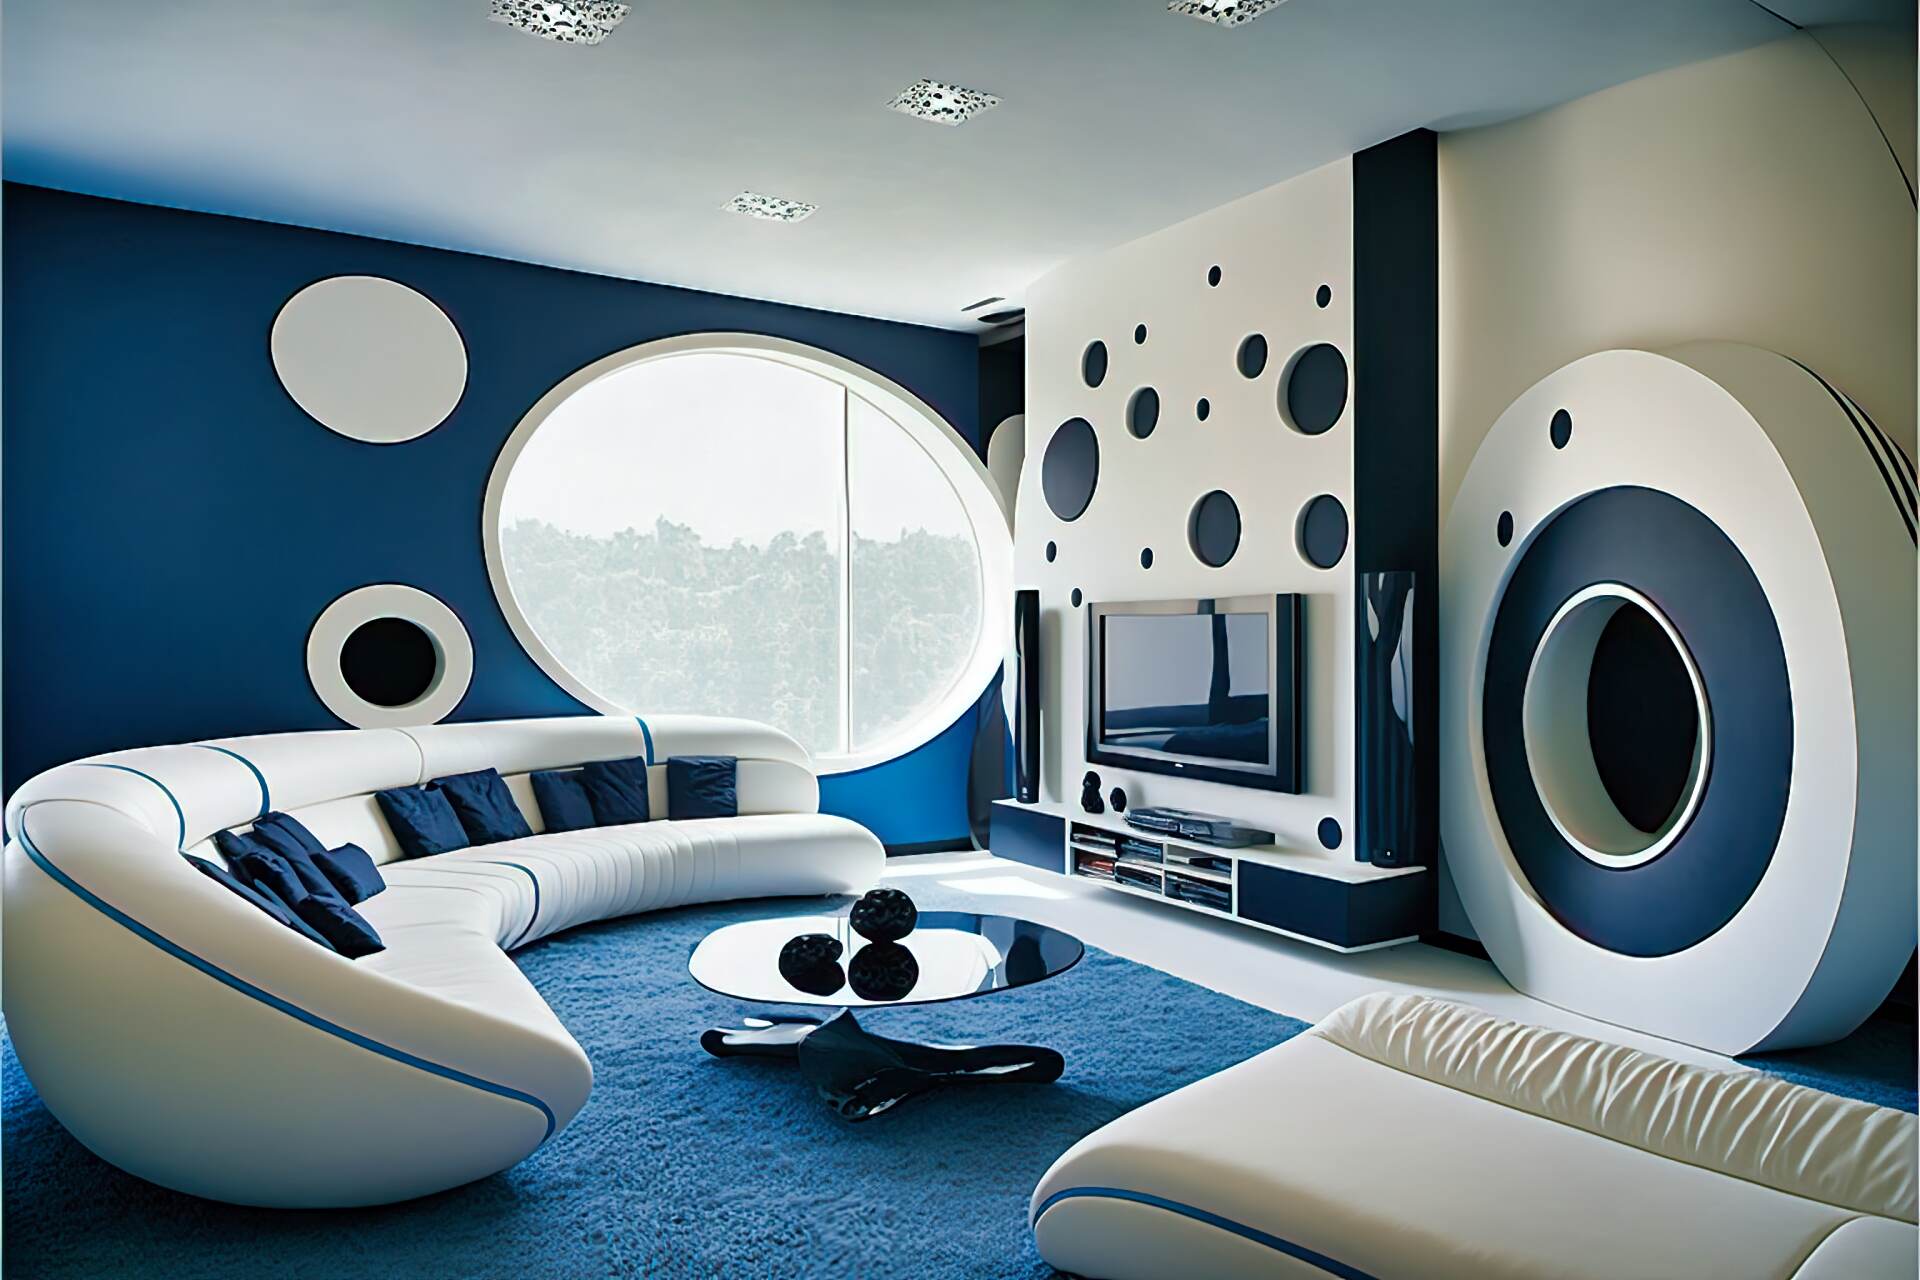 A Modern Living Room With A Futuristic Cosmic Feel. The Walls Are Painted A Deep Blue, With A Grey And Black Rug To Match. A Giant Flat-Screen Tv Is Mounted On The Wall, With A Sleek, Round Coffee Table In The Center. A White Modular Sofa Is Made Up Of Chaise Lounges And Armchairs. A Modern, Wall-Mounted Fireplace Adds A Cozy Feel. Brightly Coloured Throw Pillows In Blue And Black Add A Pop Of Colour.